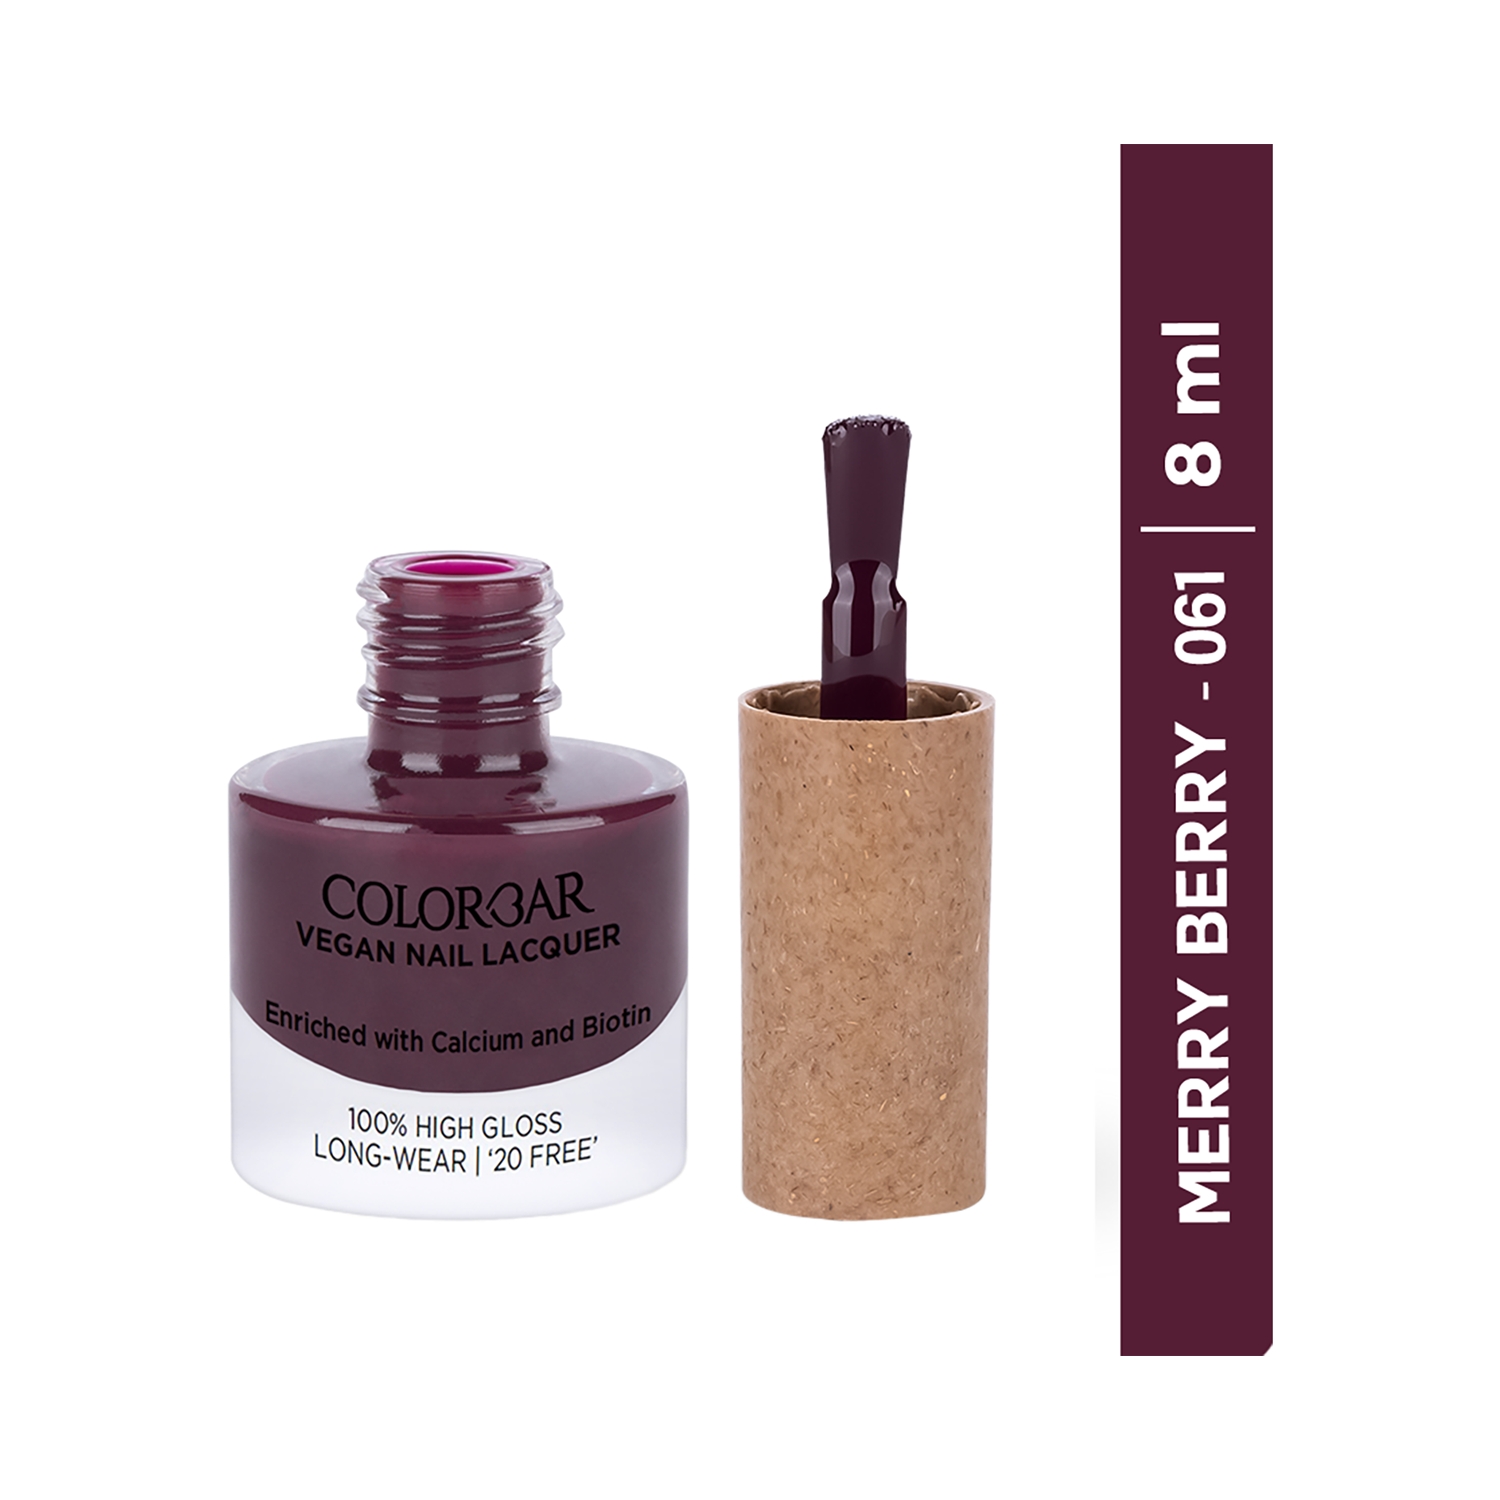 Colorbar | Colorbar Vegan Nail Lacquer - 061 Merry Berry (8ml)